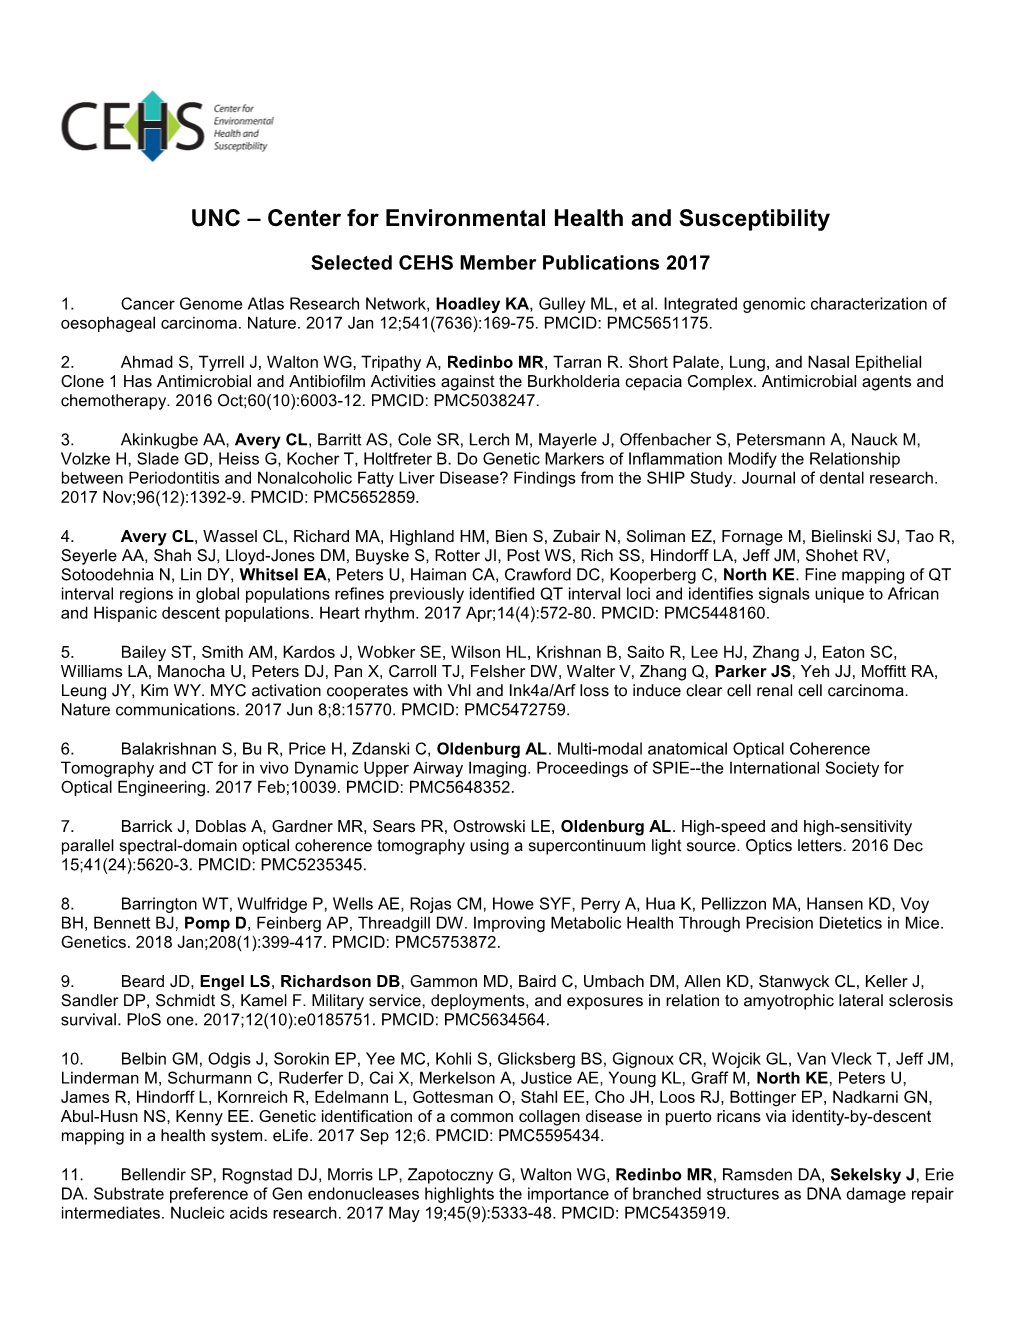 UNC Center for Environmental Health and Susceptibility